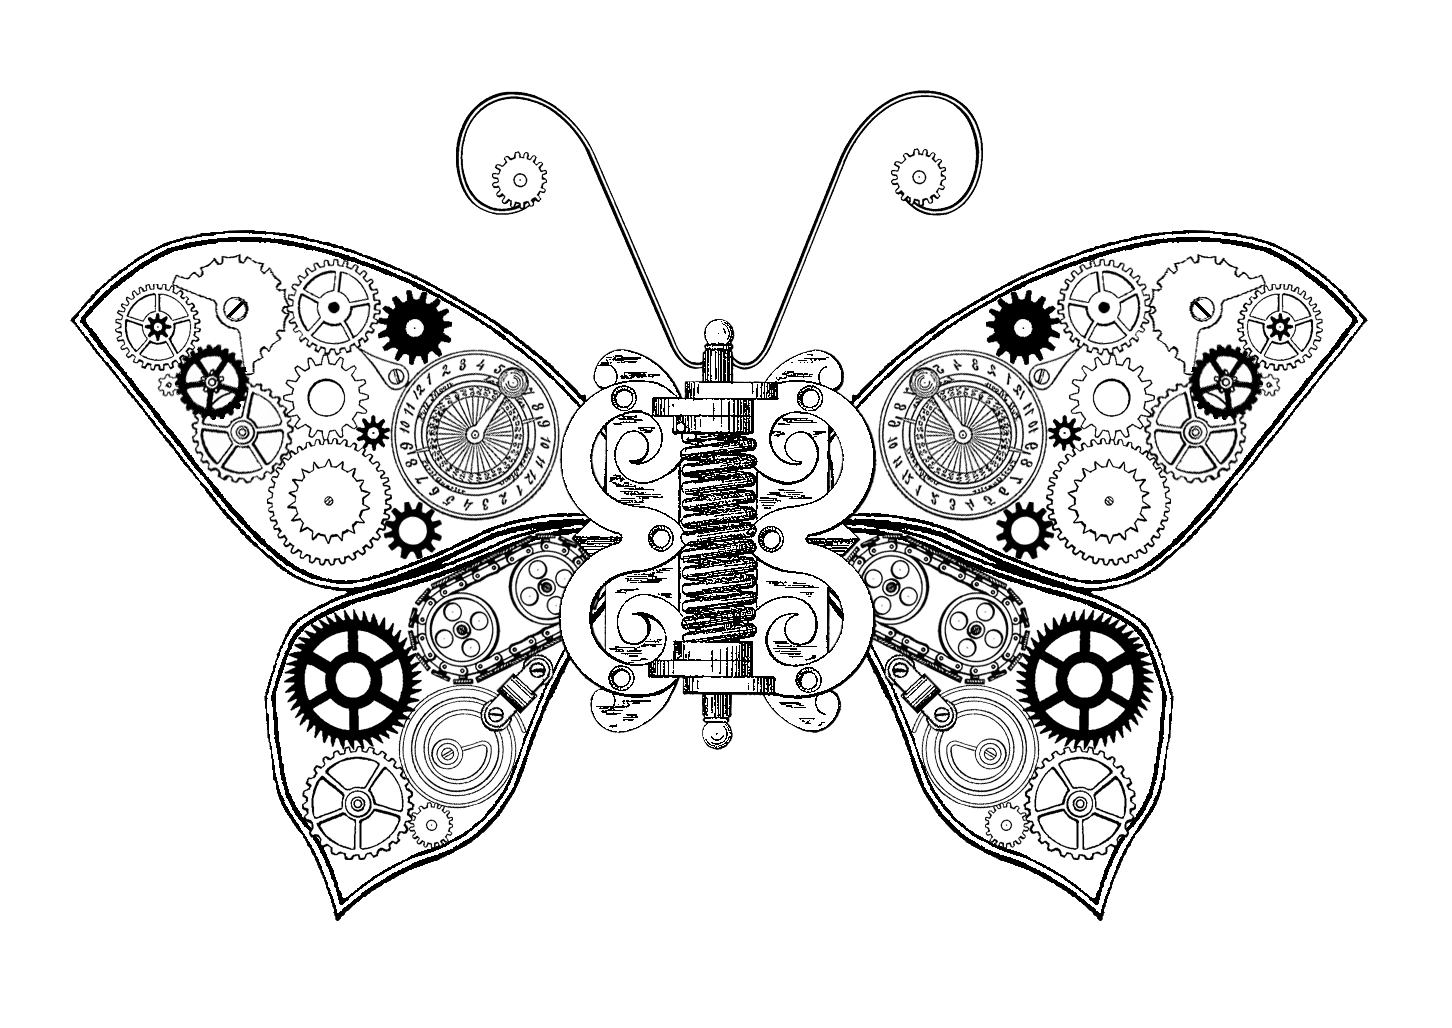 Free on dumielauxepices net. Steampunk clipart dragonfly